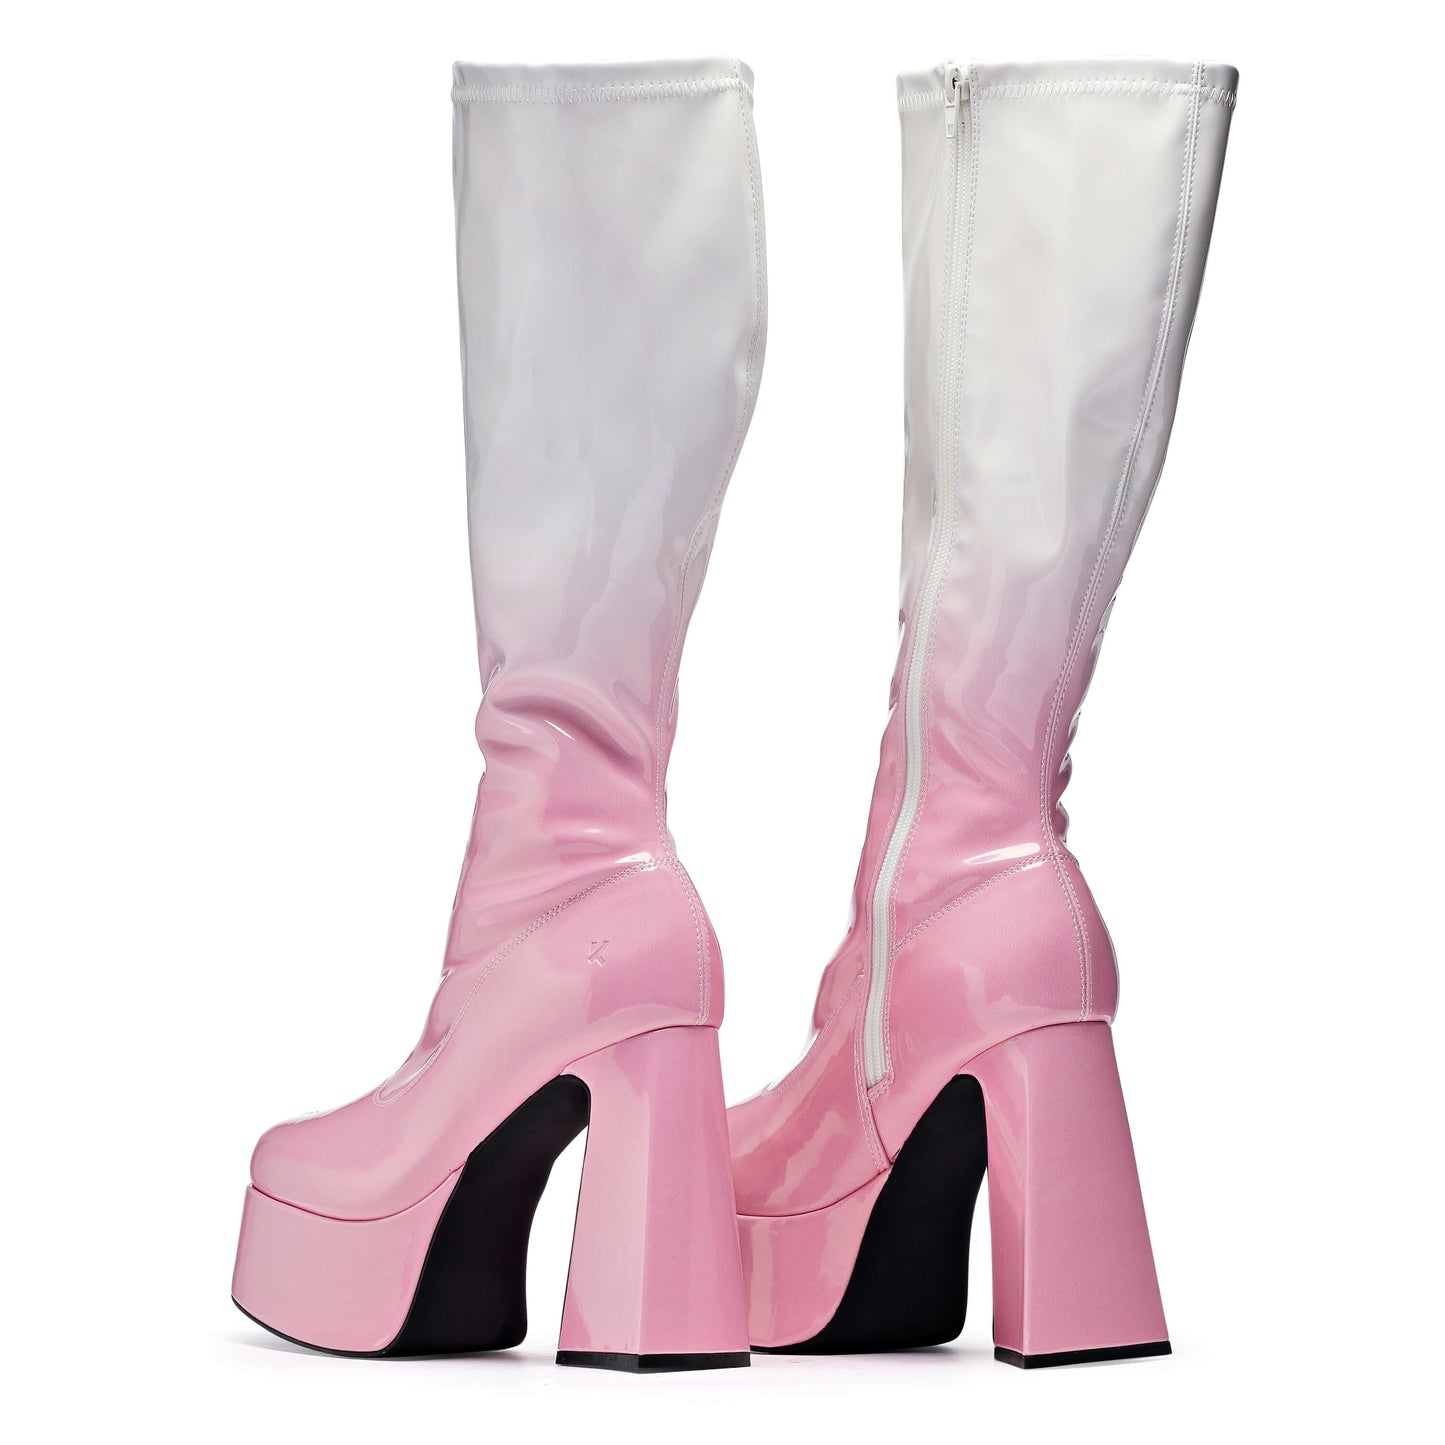 Raspberry Ripple Heeled Long Boots - Long Boots - KOI Footwear - Pink - Back View